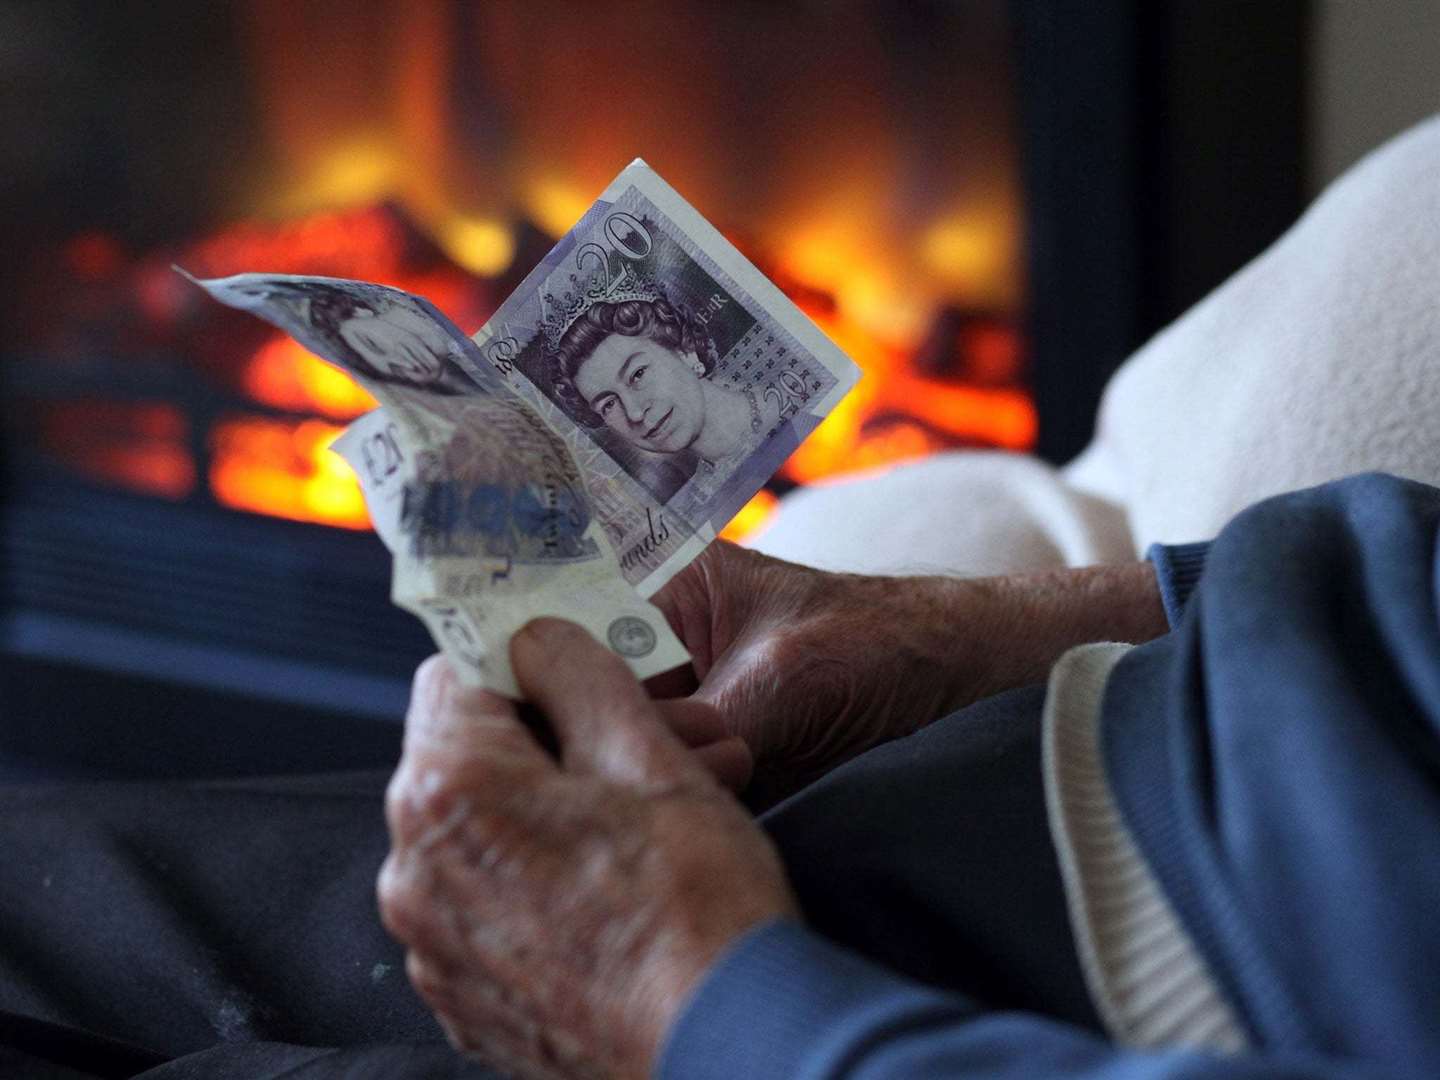 Rising energy prices next month could see 47 per cent of households in the Highlands move into fuel poverty.